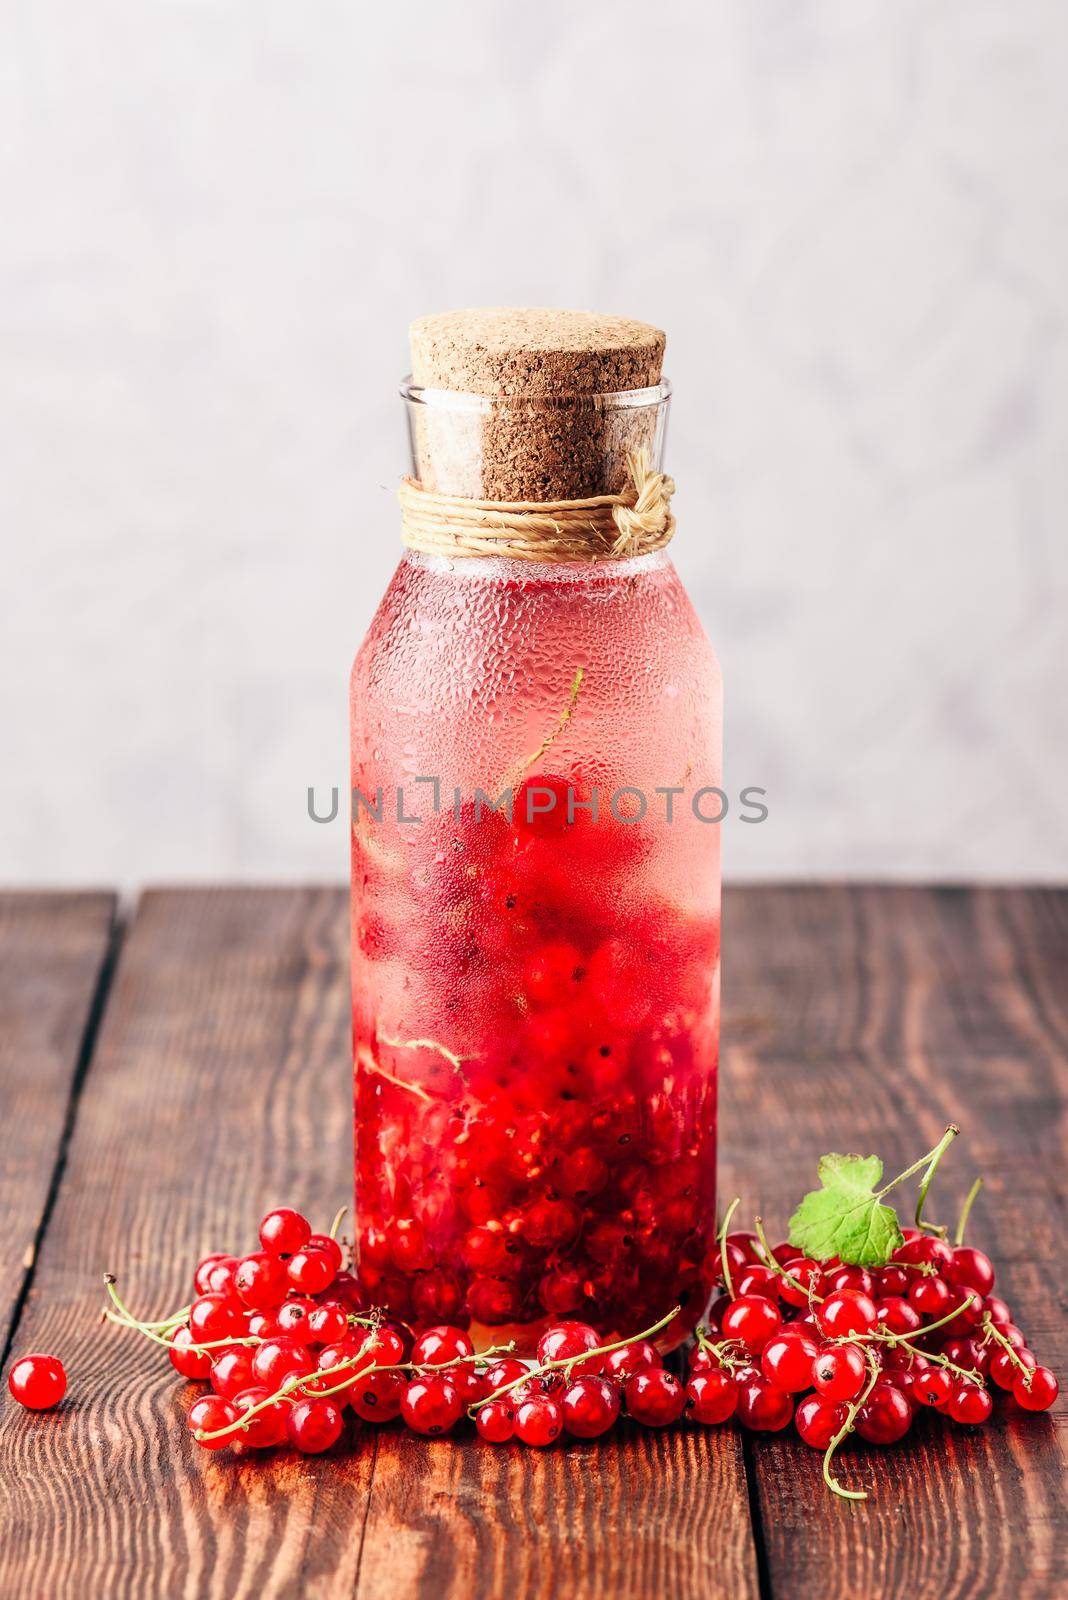 Red currant infused water by Seva_blsv